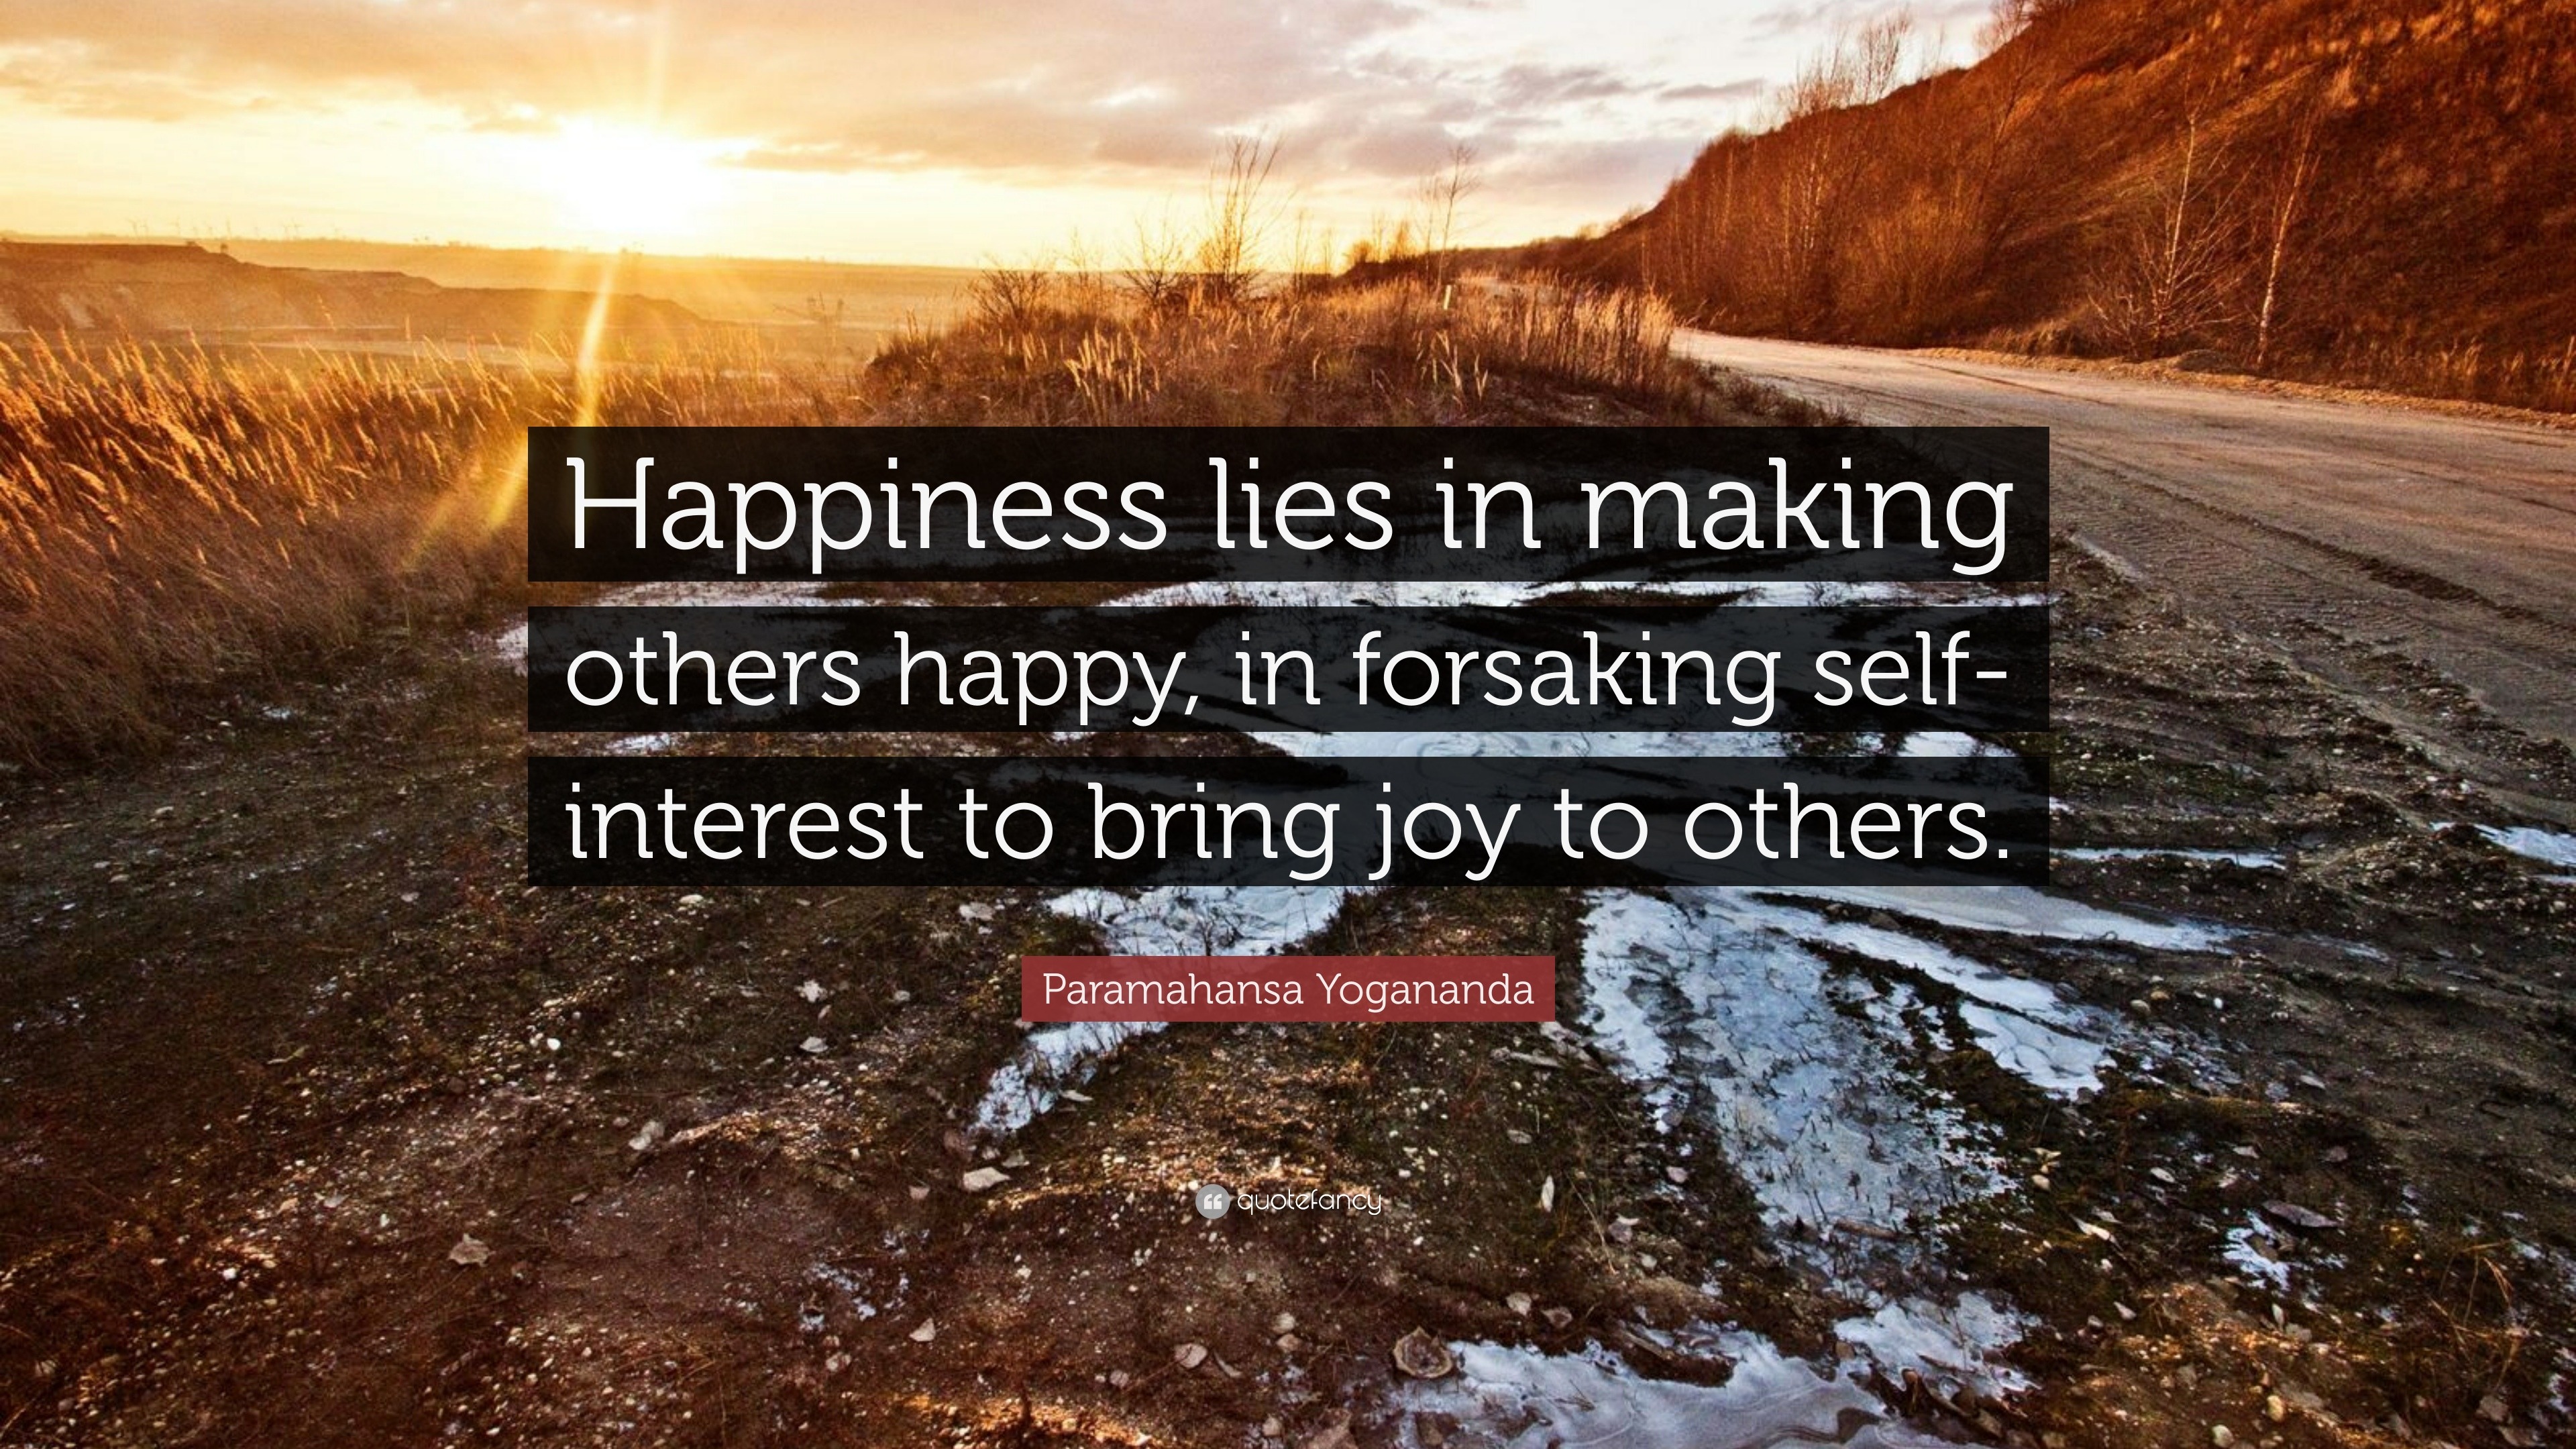 essay on true happiness lies in making others happy